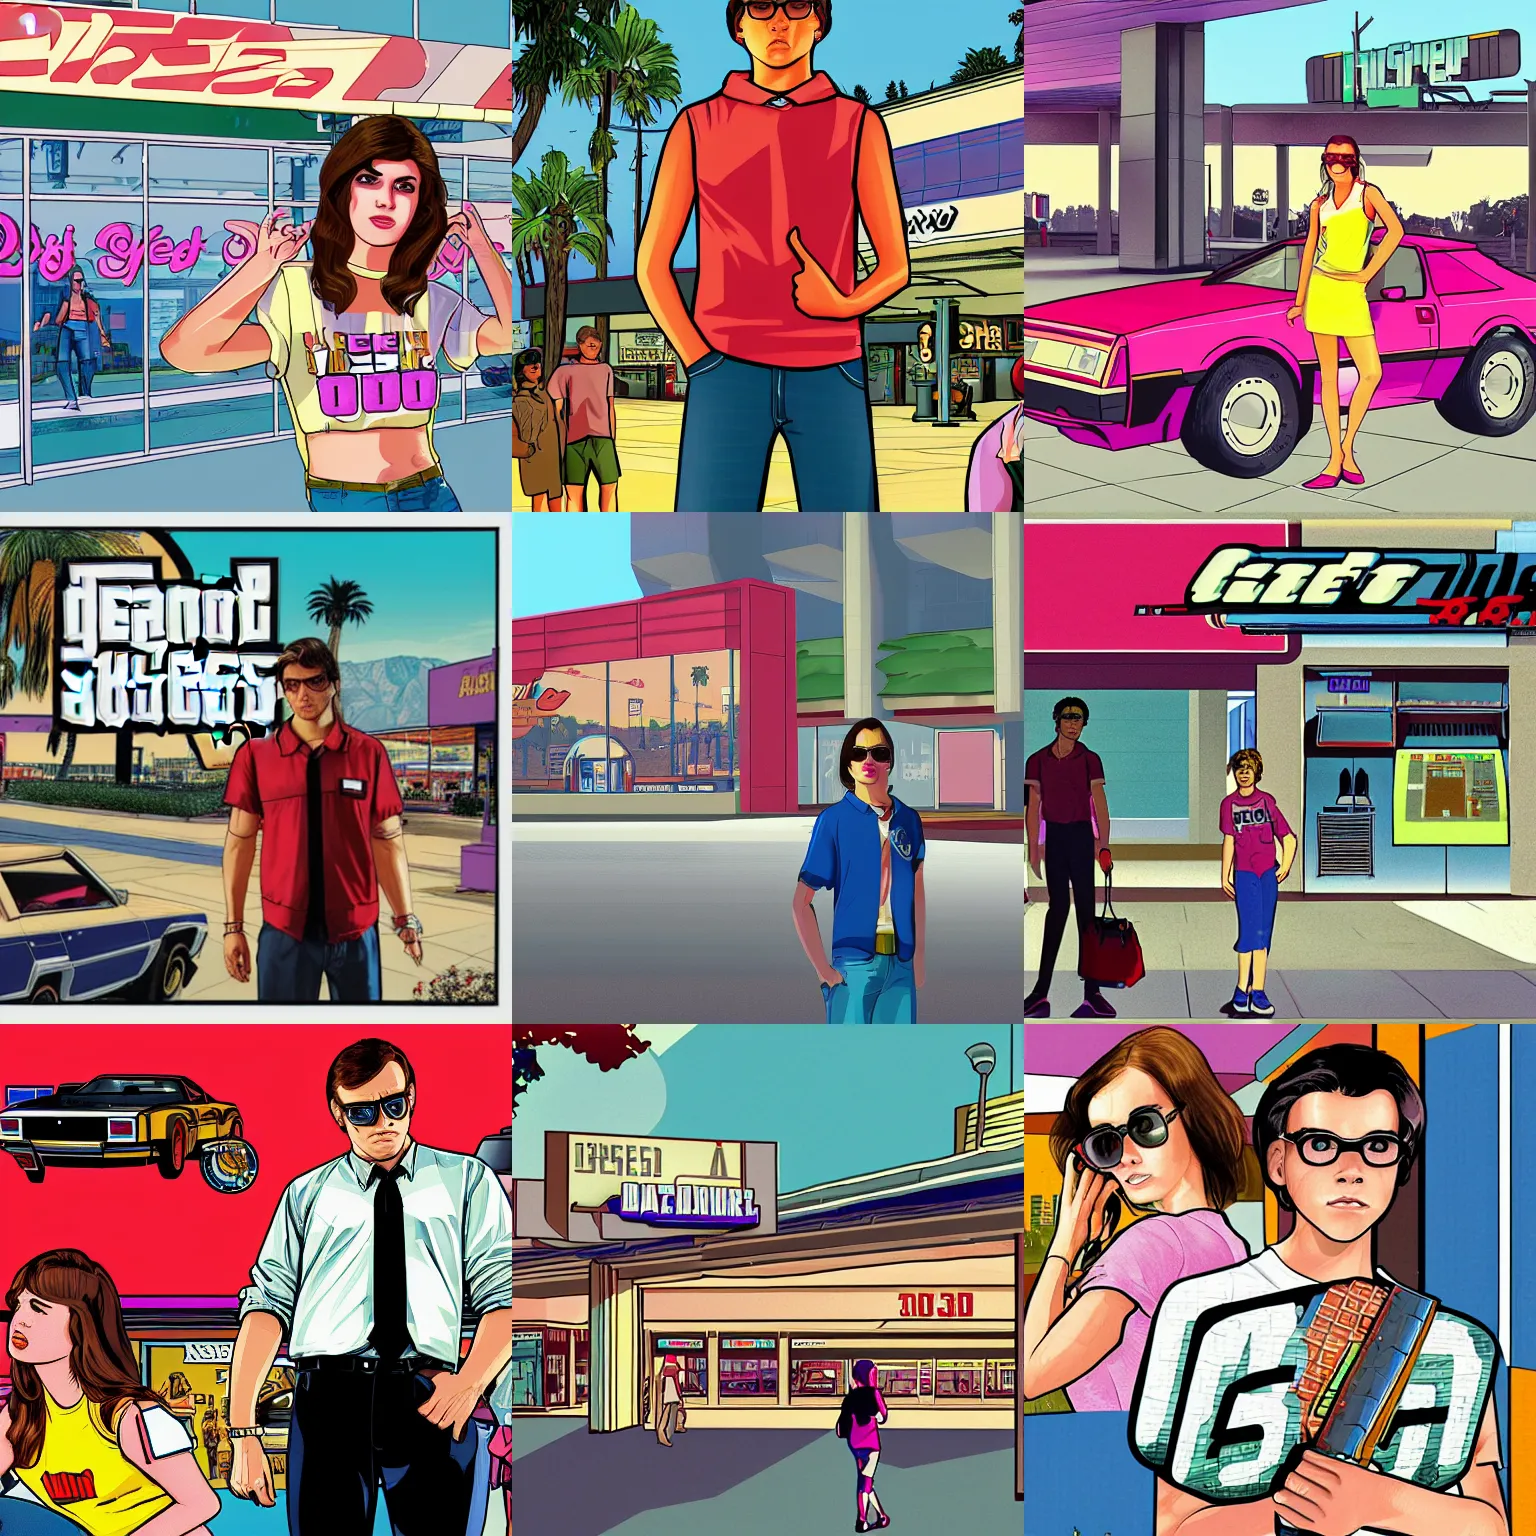 Prompt: GTA V illustration of 1980s nerdy teen on the cover of GTA V, at the entrance to a 1980s shopping mall